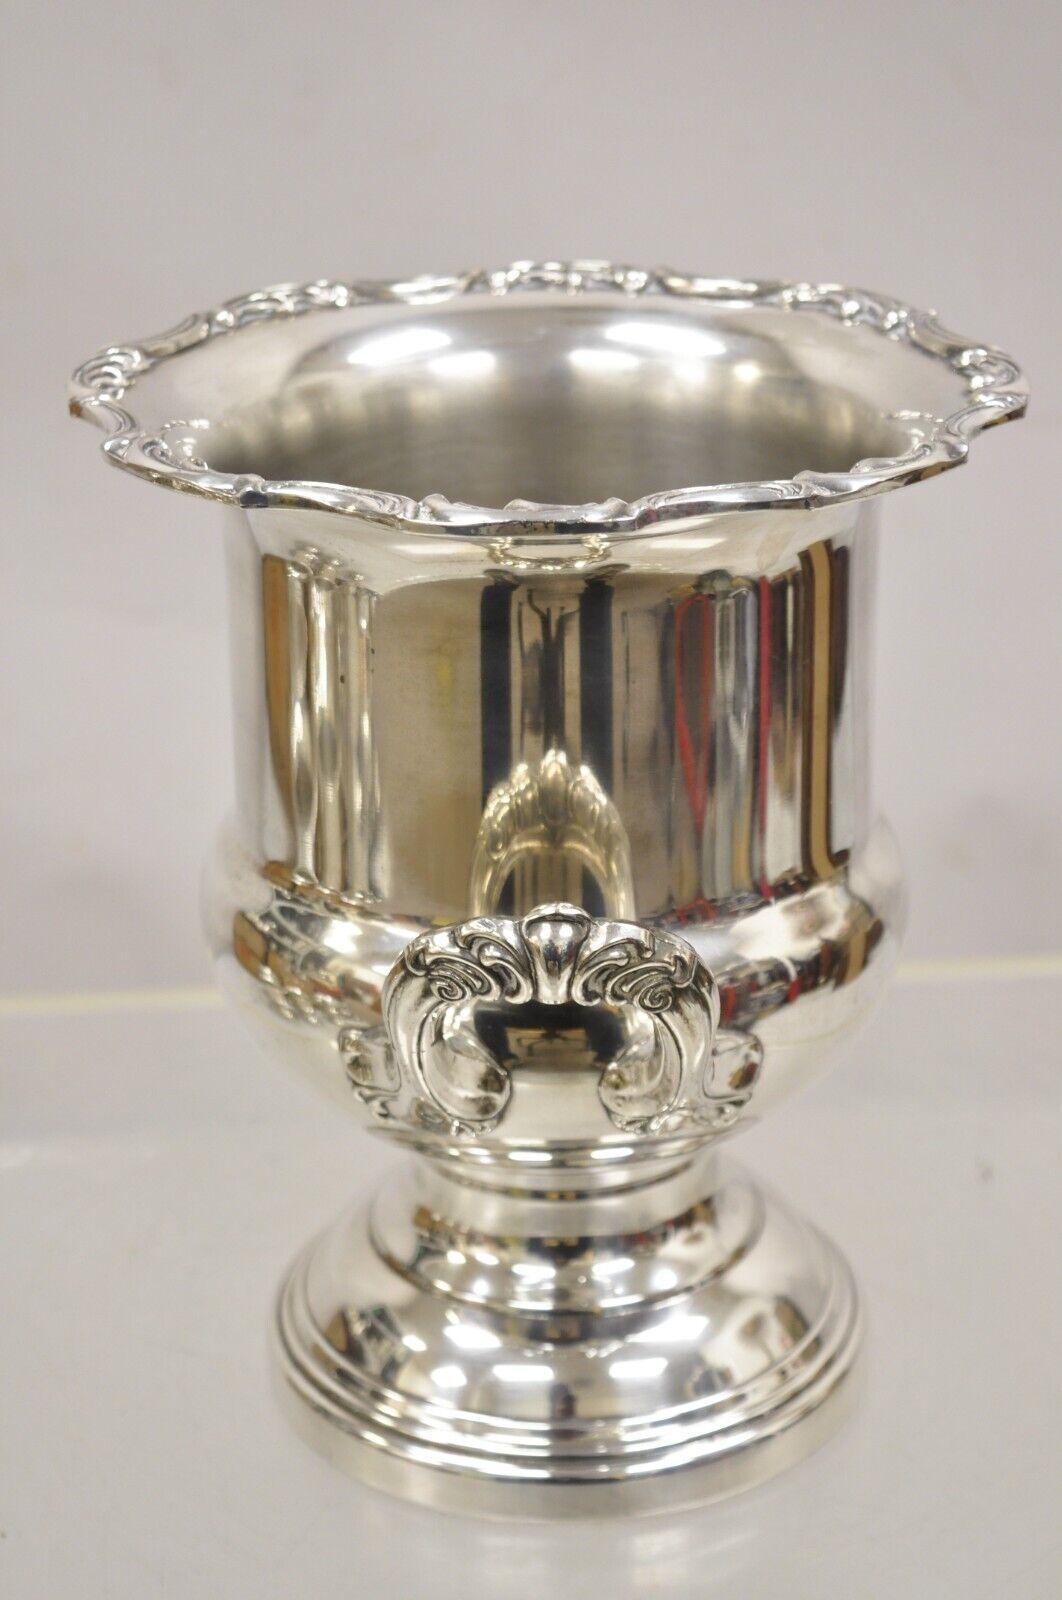 Vintage Twin Handle Silver Plated Trophy Cup Champagne Chiller Ice Bucket. Circa Mid to Late 20th Century. Measurements: 10